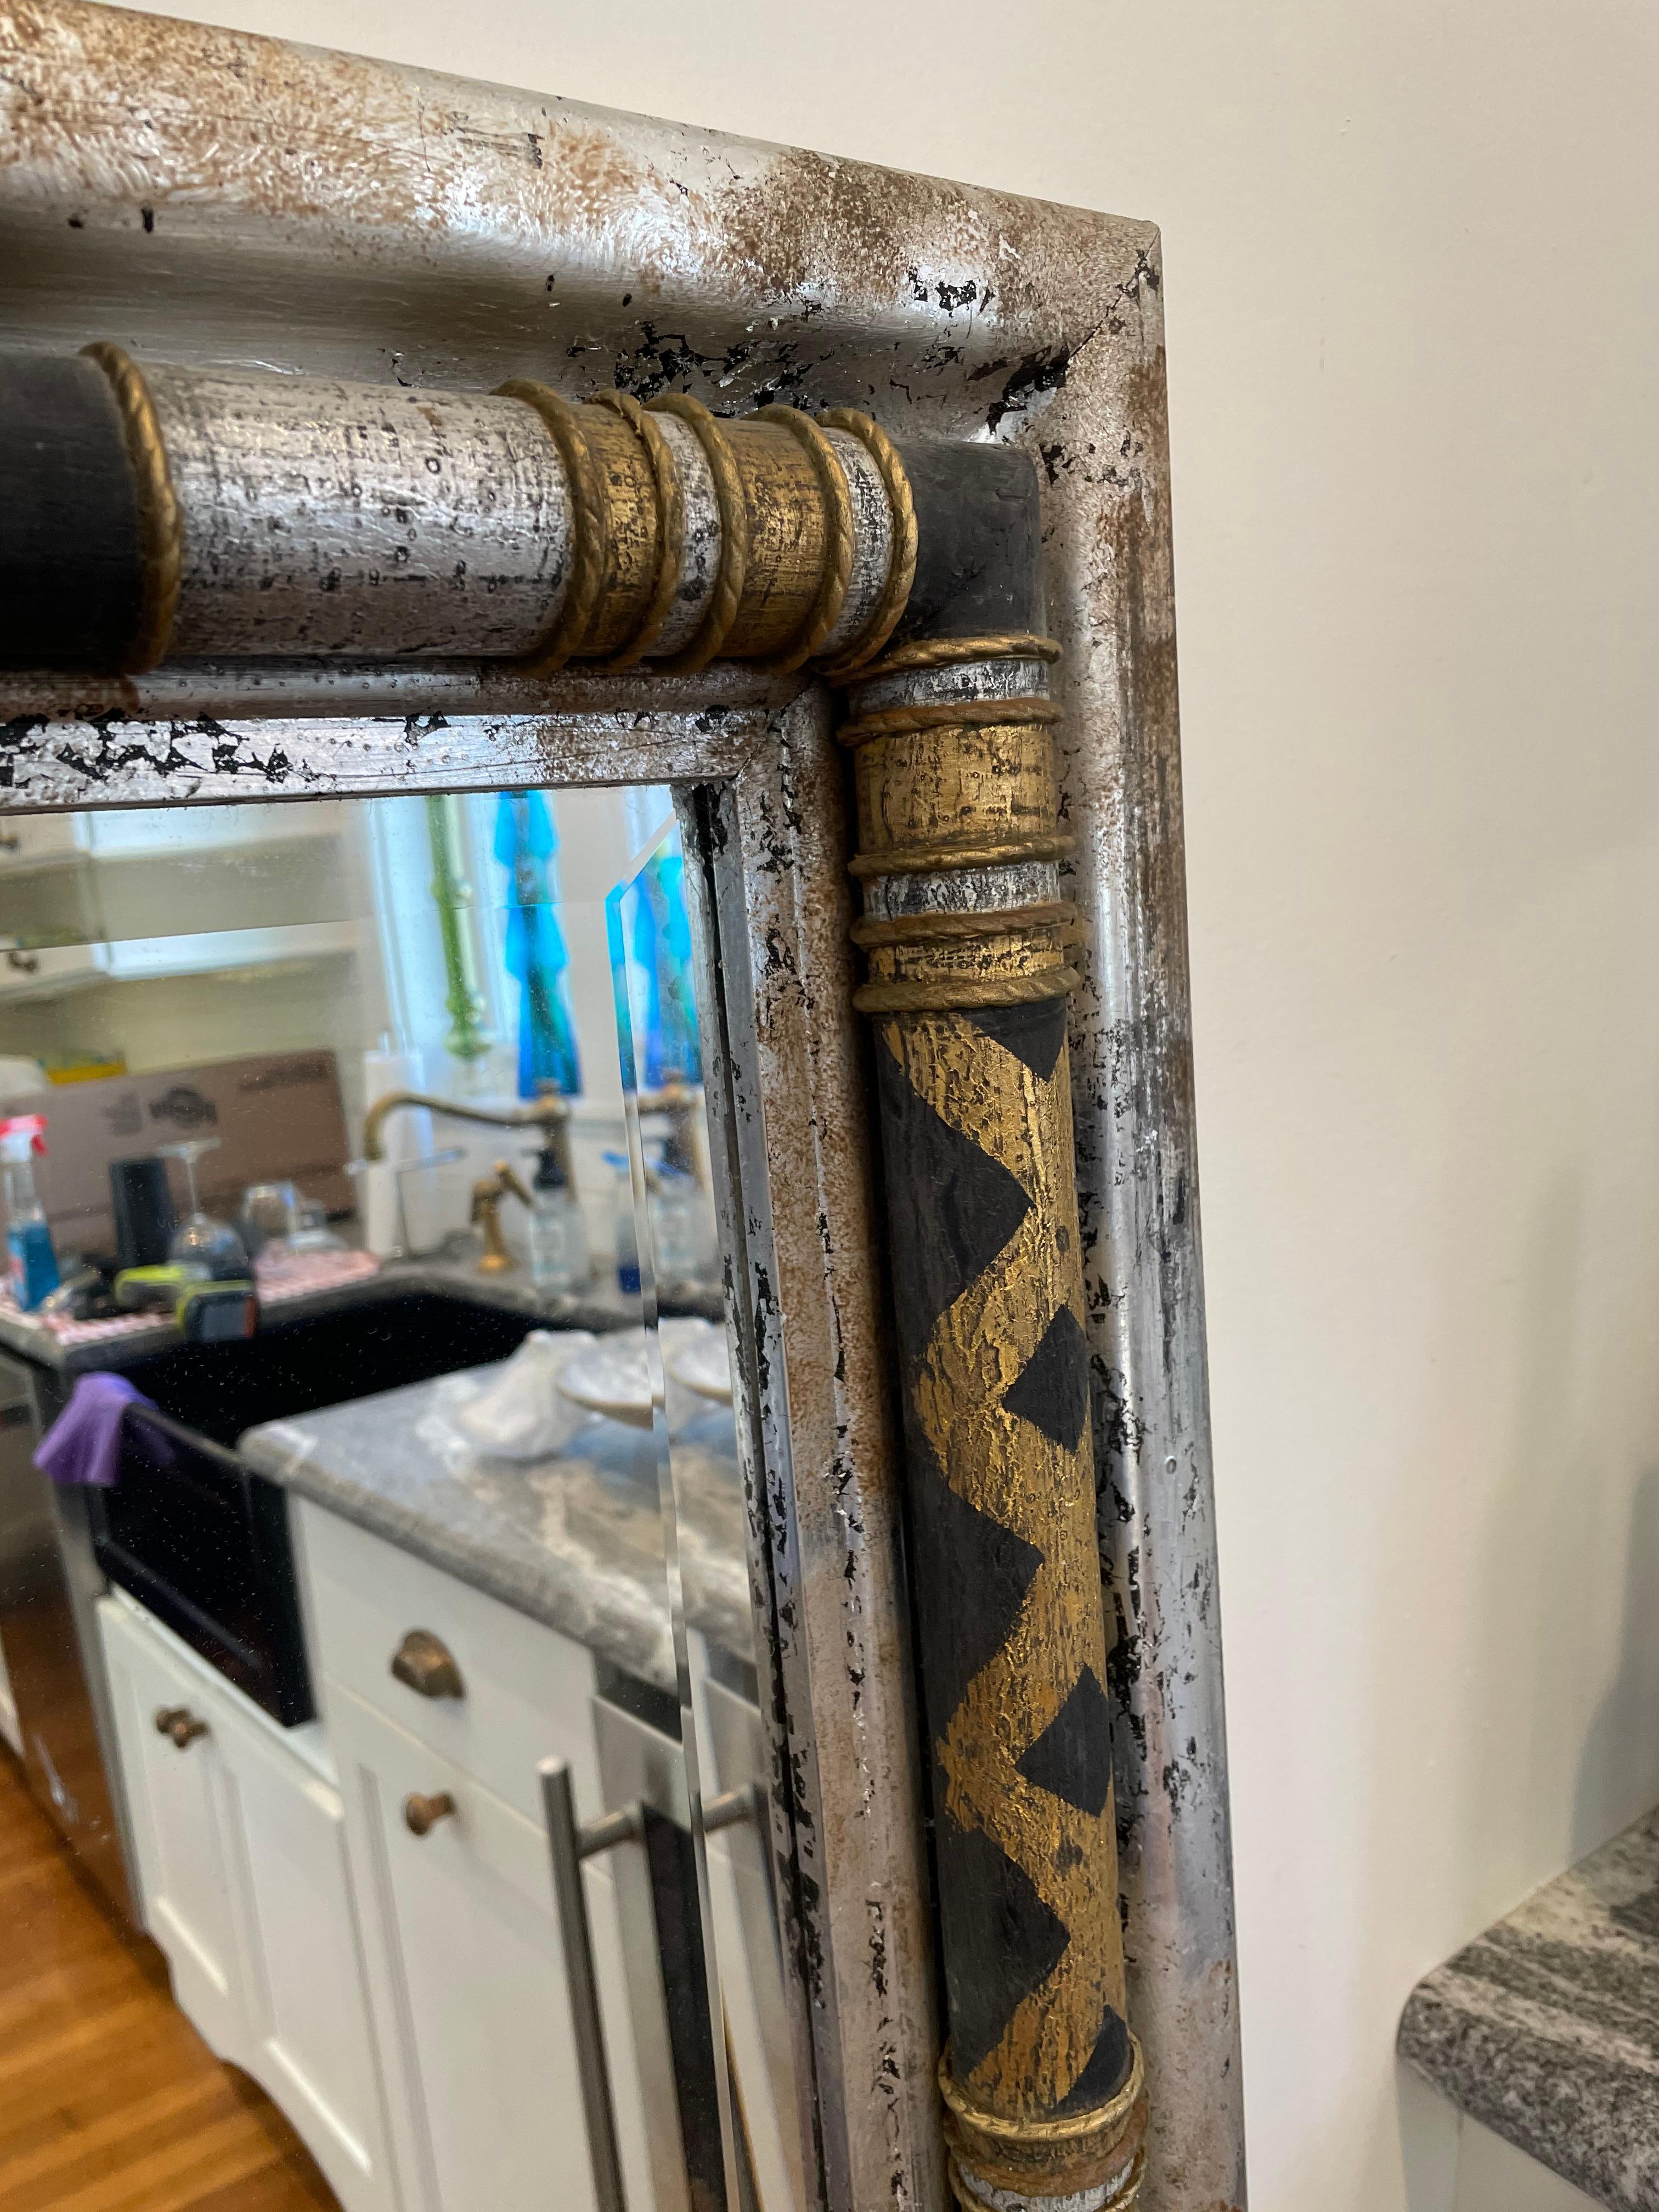 Stunning John-Richard decorative wall mirror with a modern twist on neoclassical design. Silver fleck finish adorned with black and gold harlequin columns. Striking presence that packs a punch!
Curbside to NYC/Philly $300